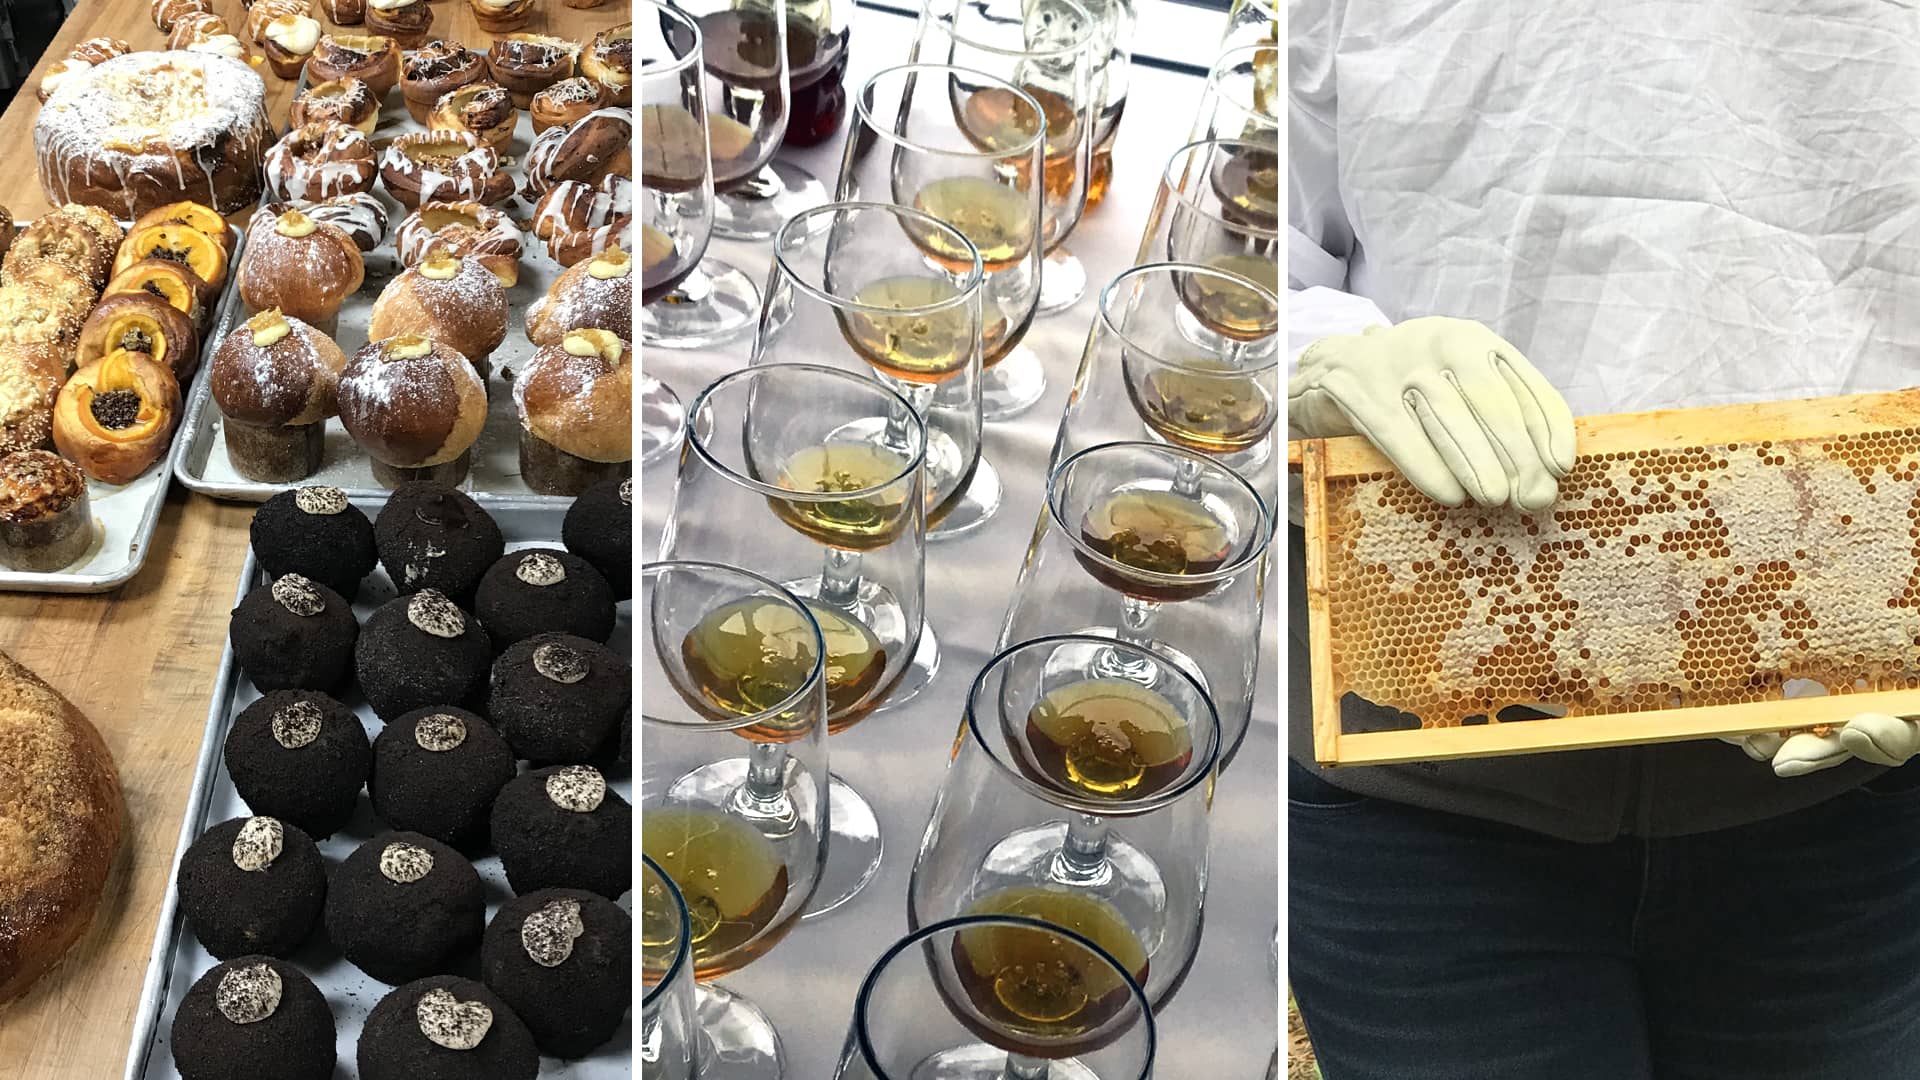 Baked goods, a honey tasting and an apiary tour at the 2018 Honey Baking Summit.